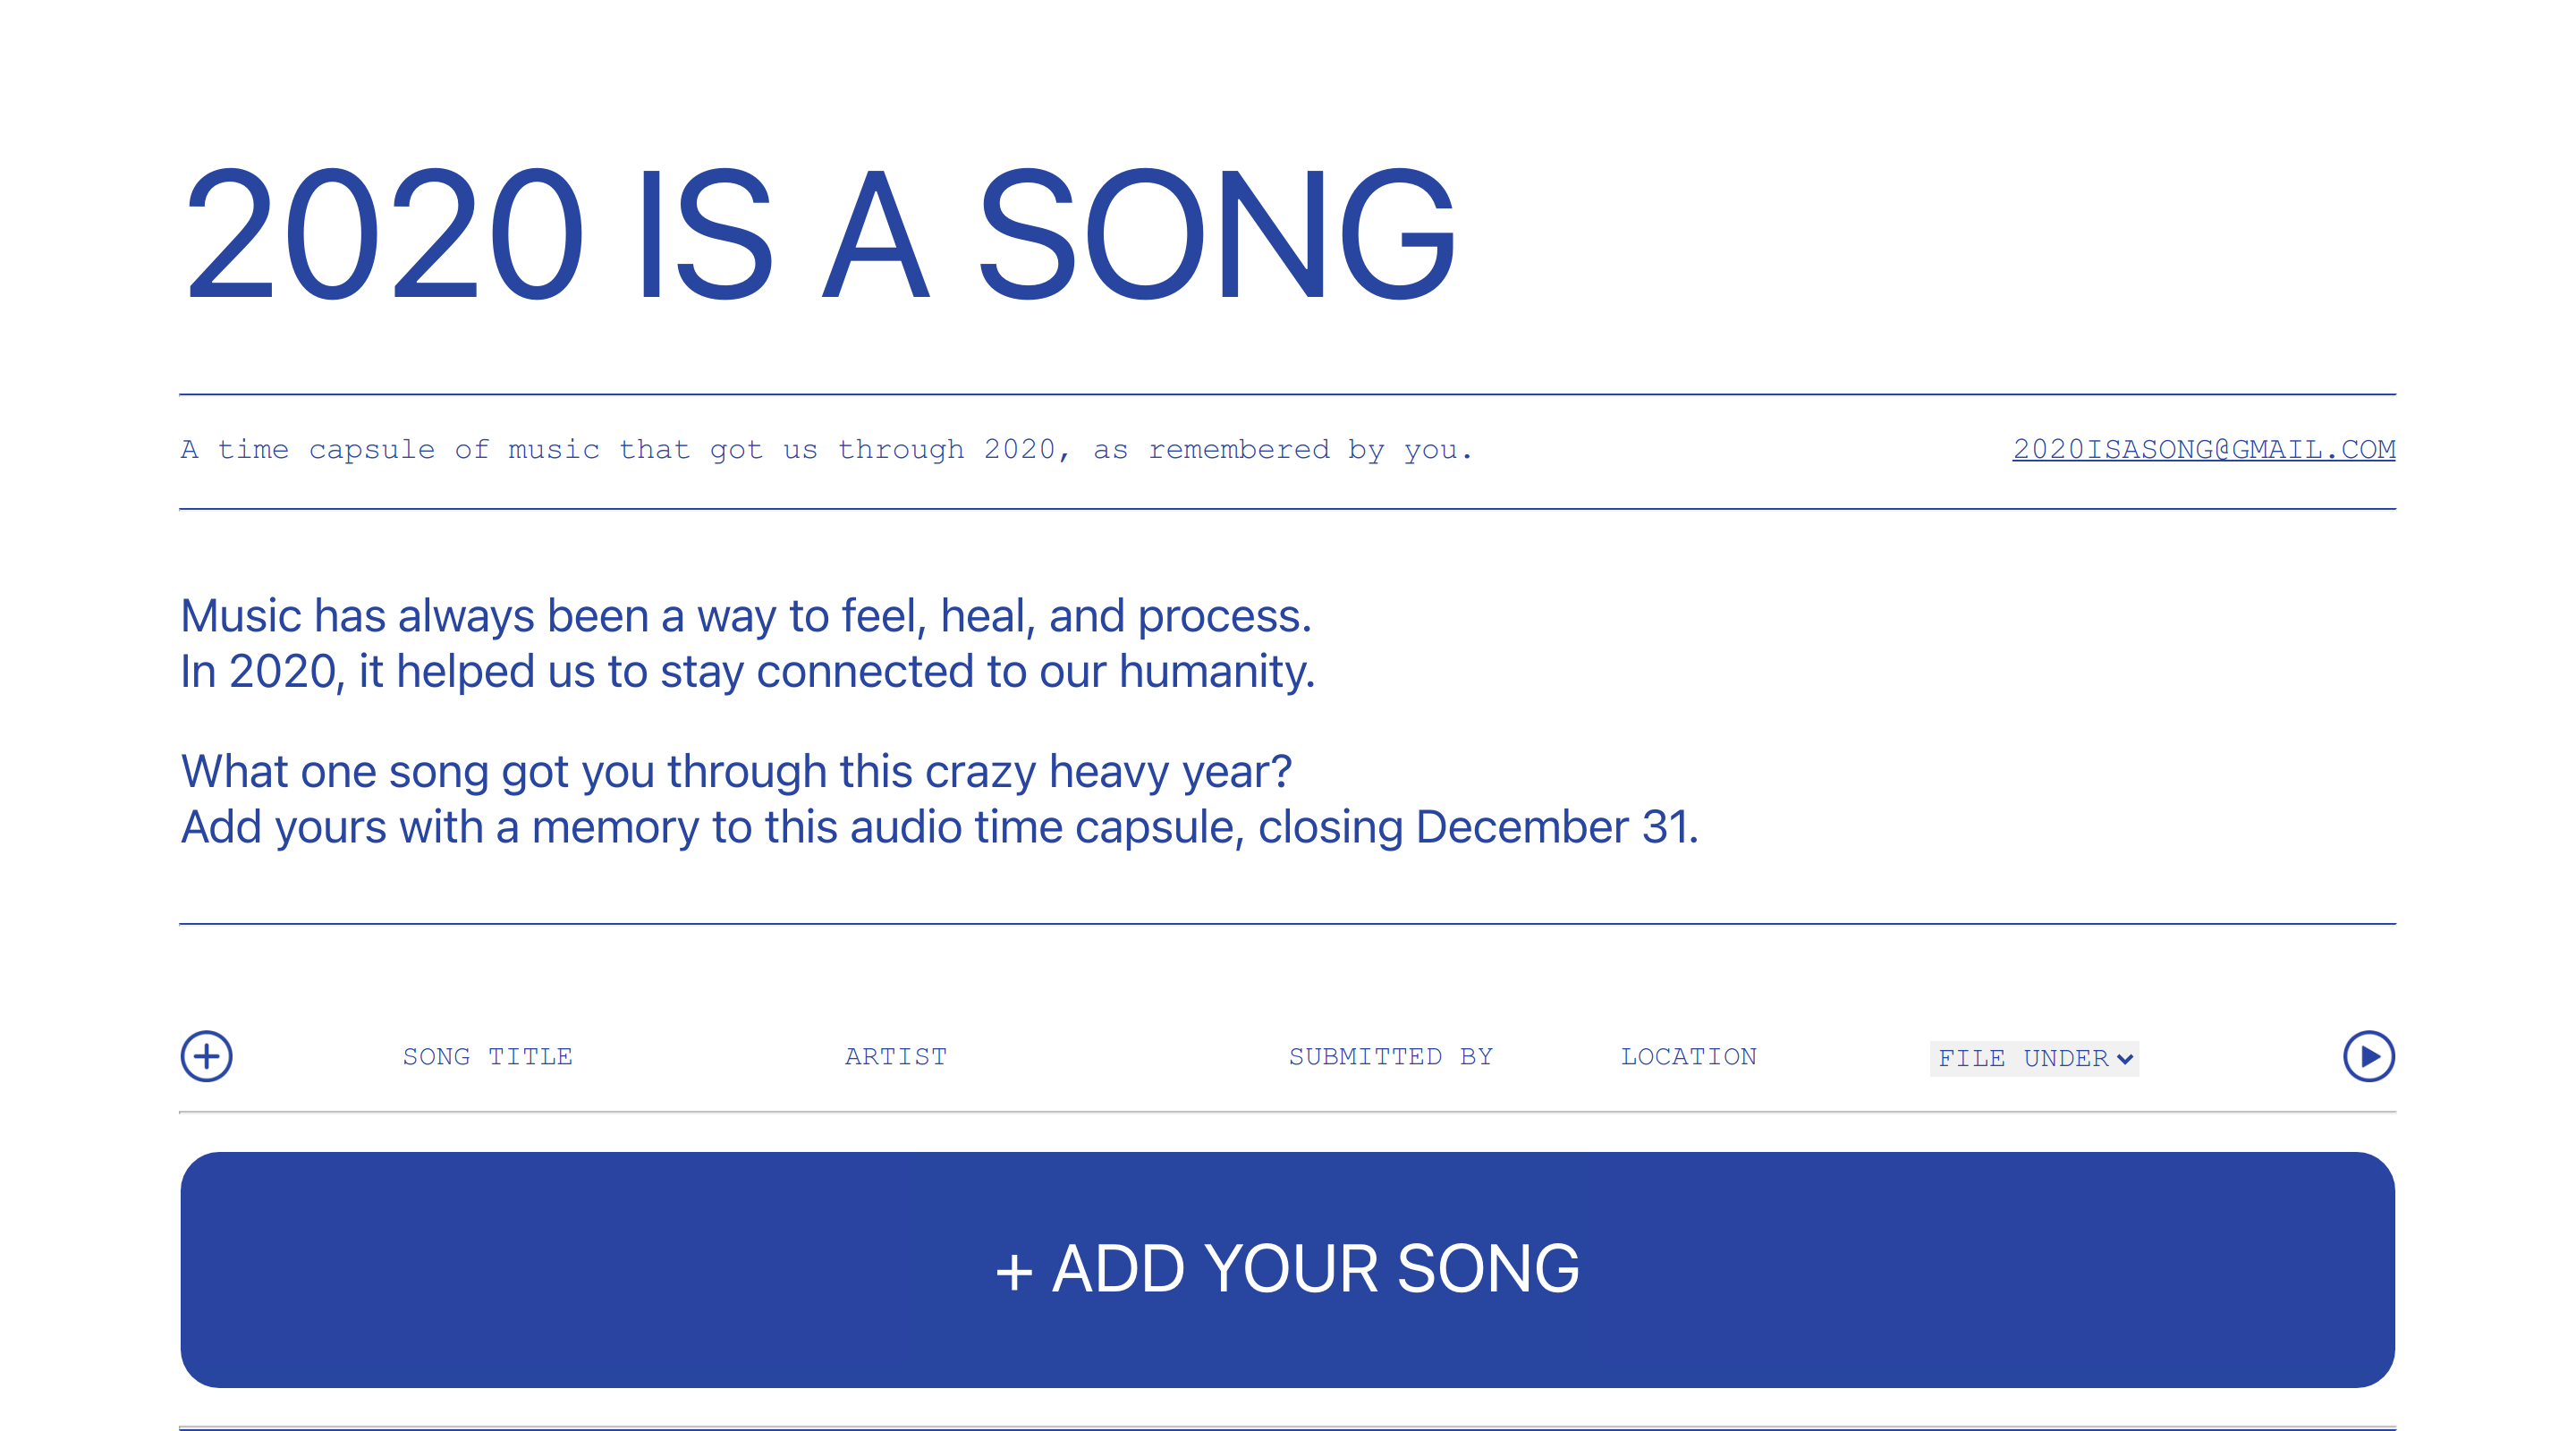 2020 IS A SONG website